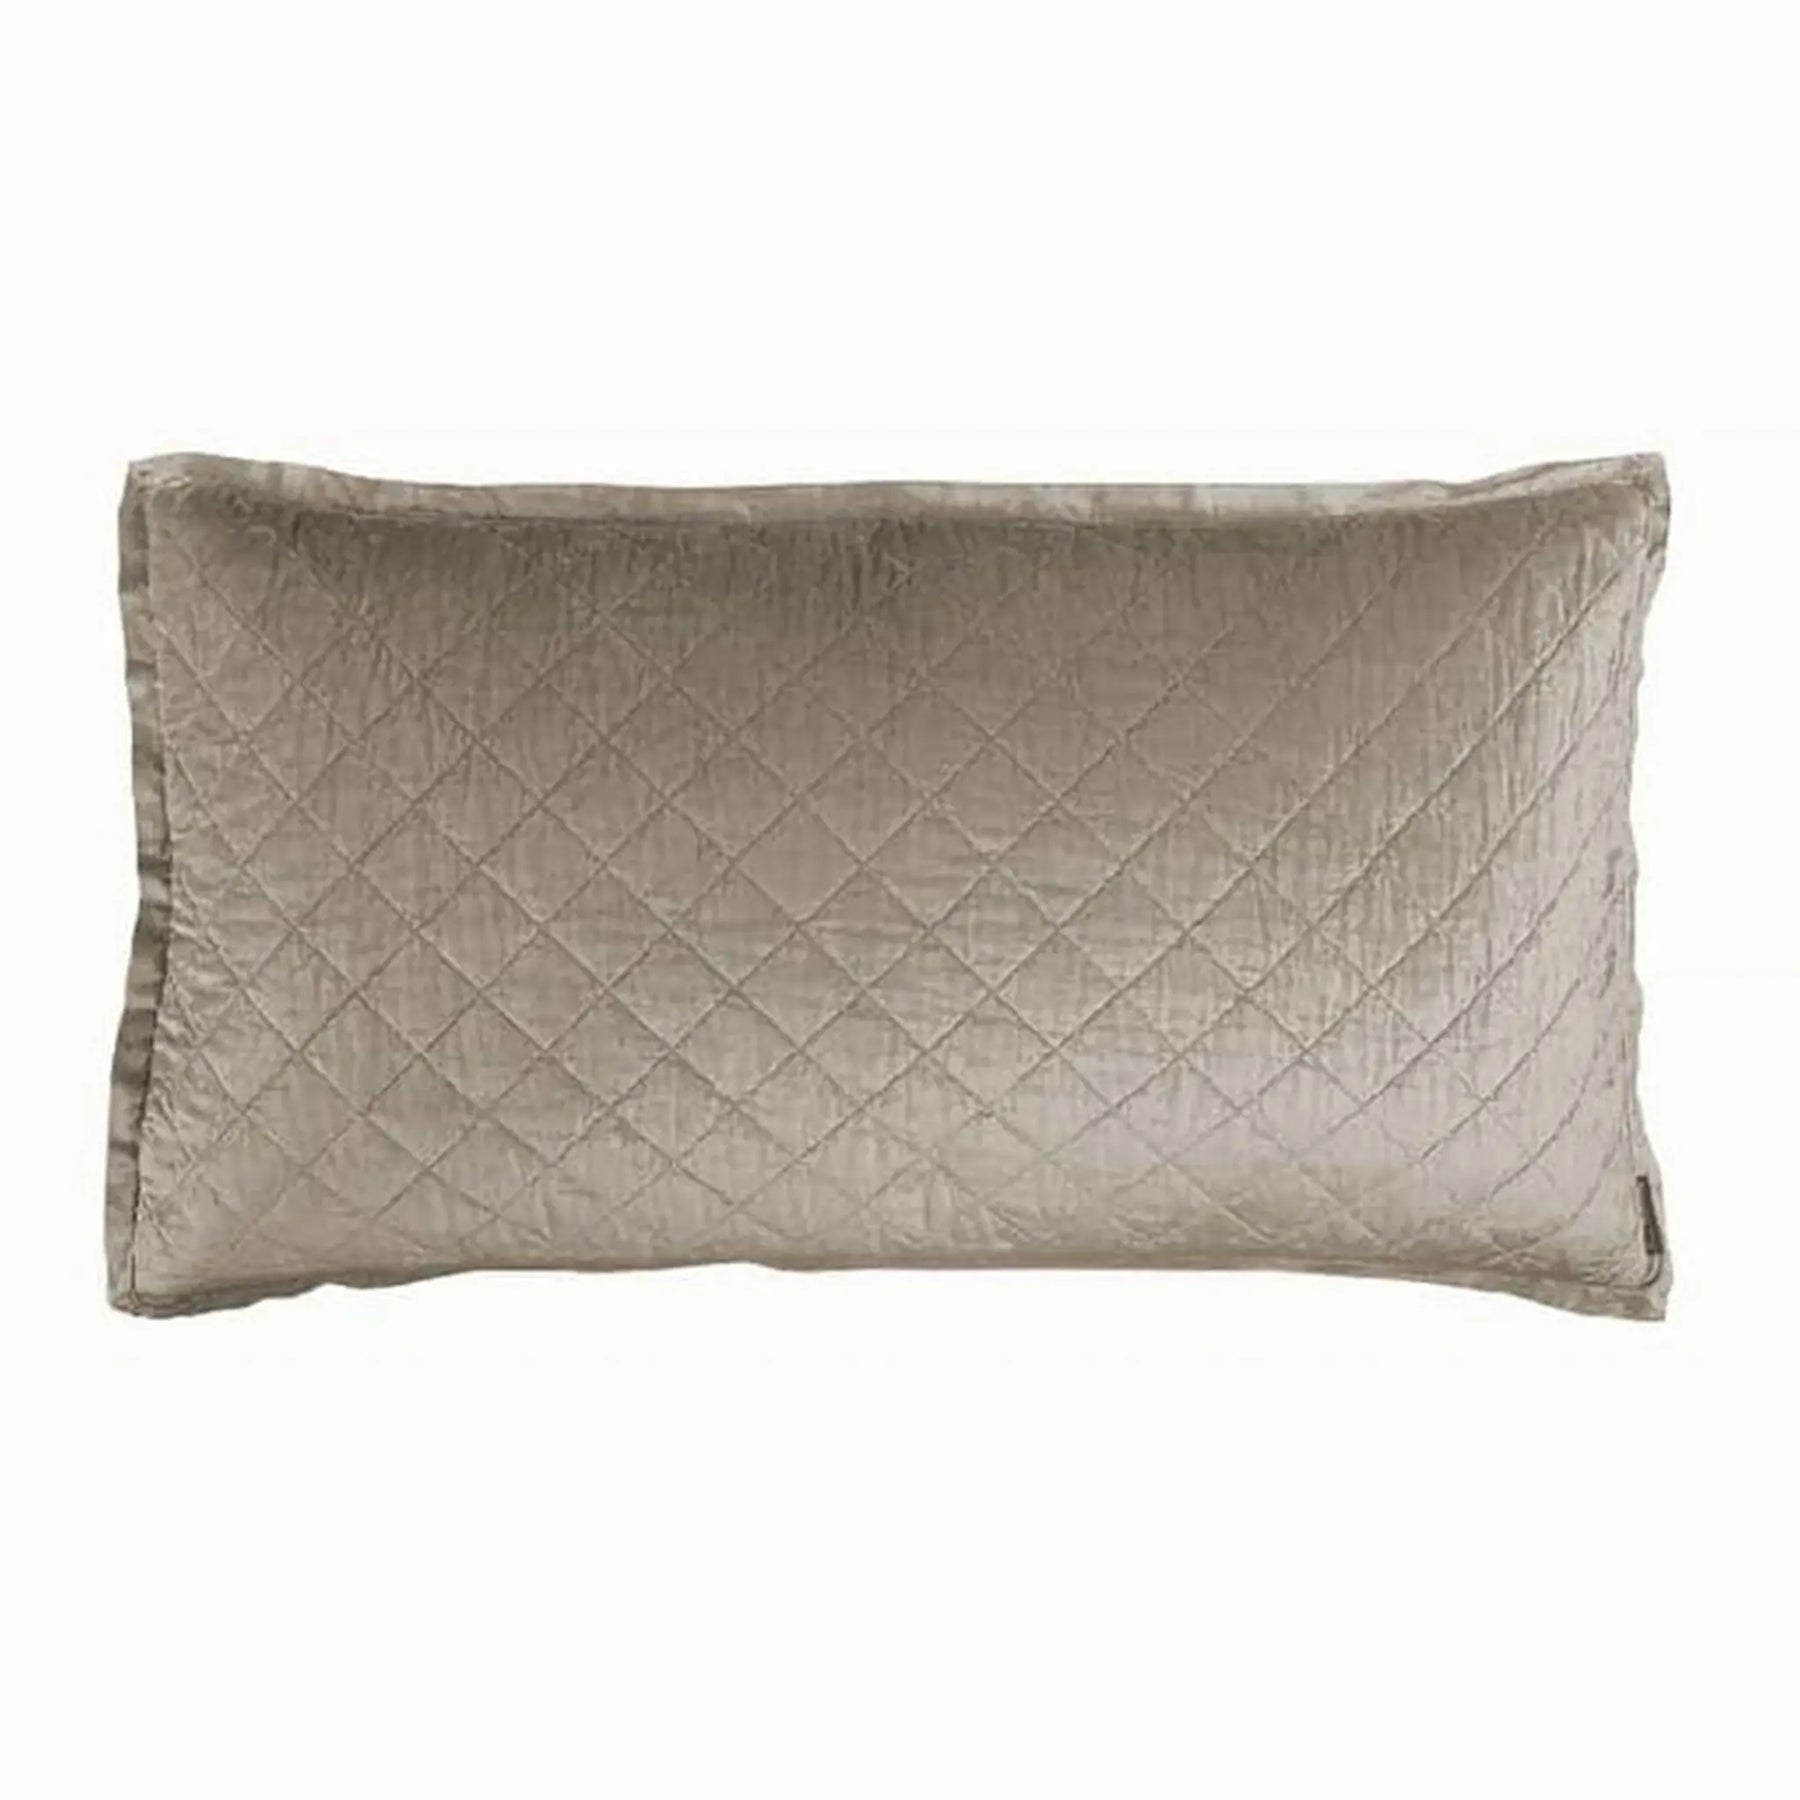 Lili Alessandra Chloe Diamond Quilted King Pillow in Fawn